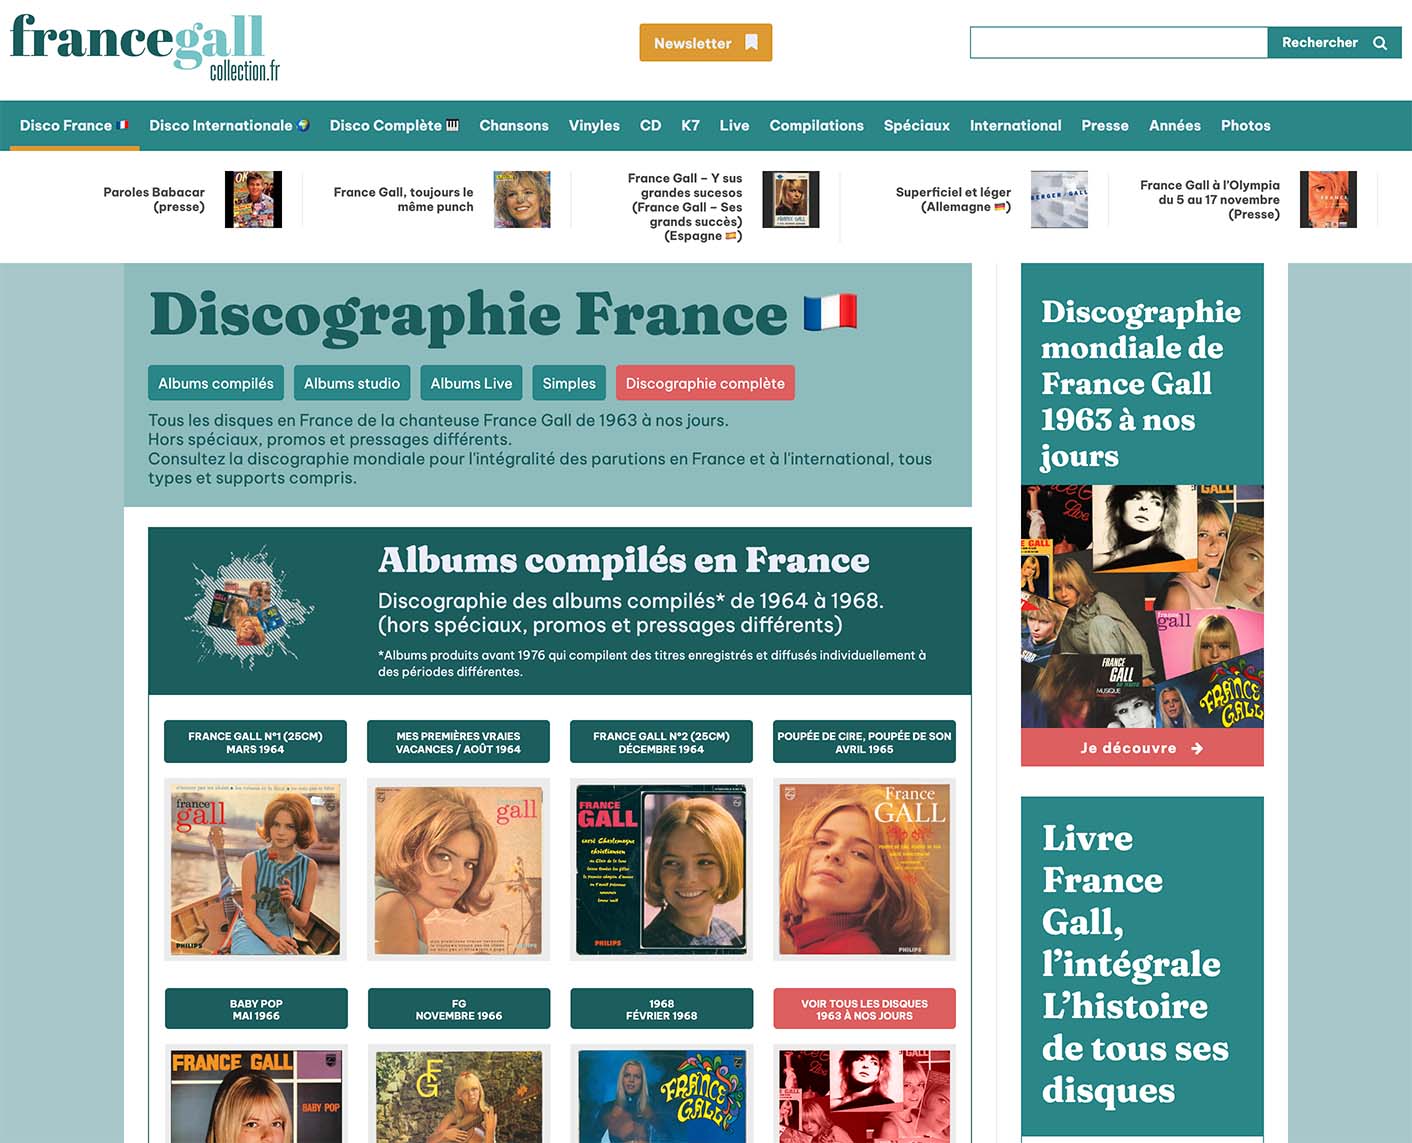 Page discographie France